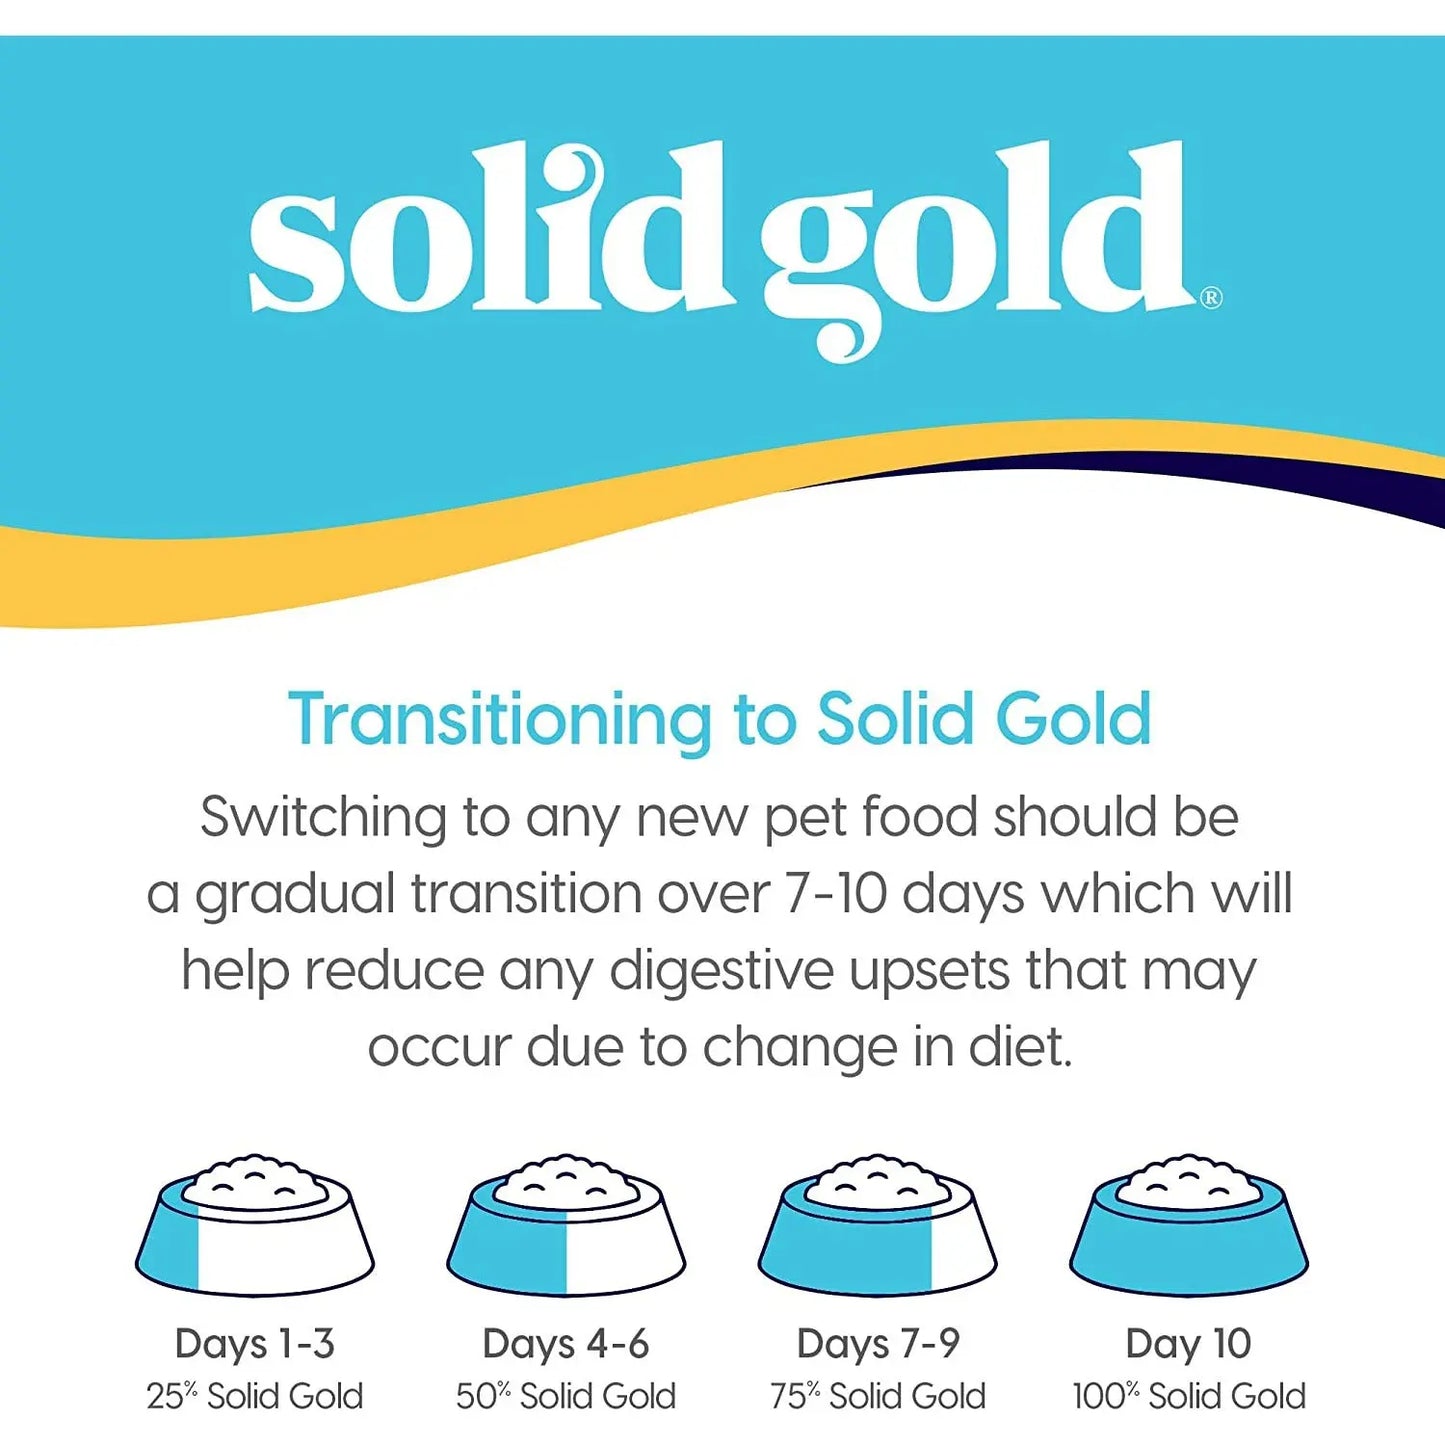 Solid Gold® Let’s Stay In™ Grain Free Salmon, Lentils & Apples Recipe Indoor Cat Food Solid Gold